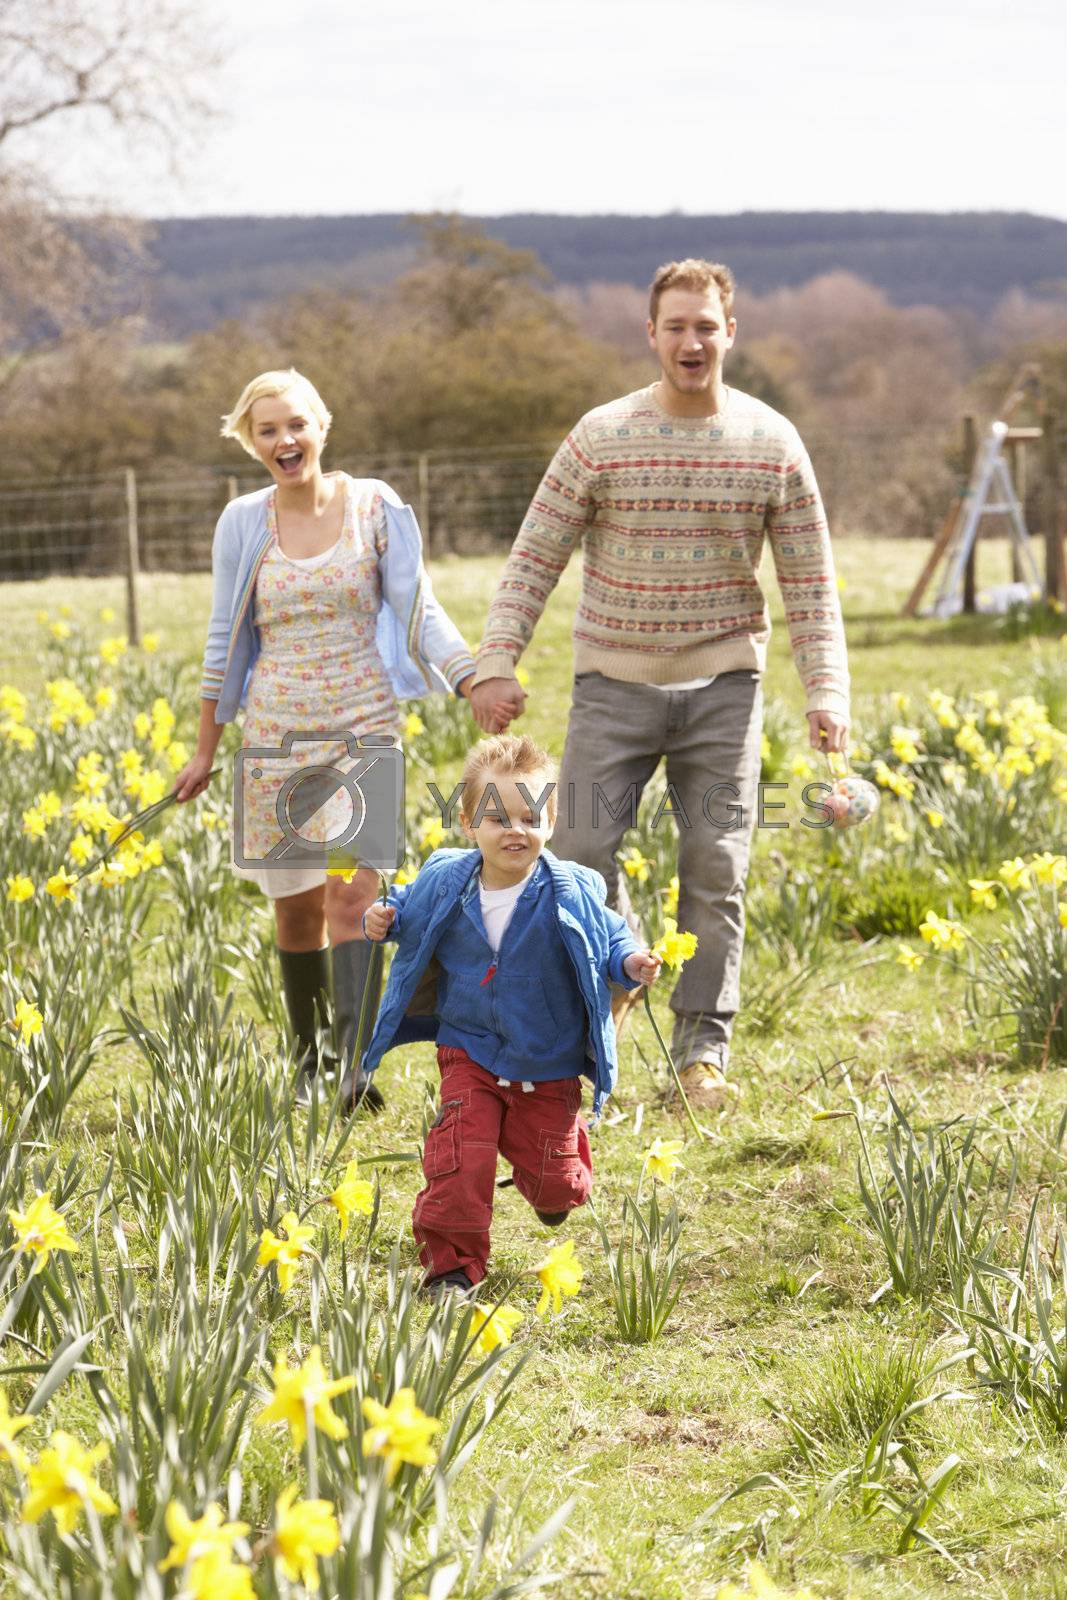 Royalty free image of Young Family Walking Amongst Spring Daffodils by omg_images